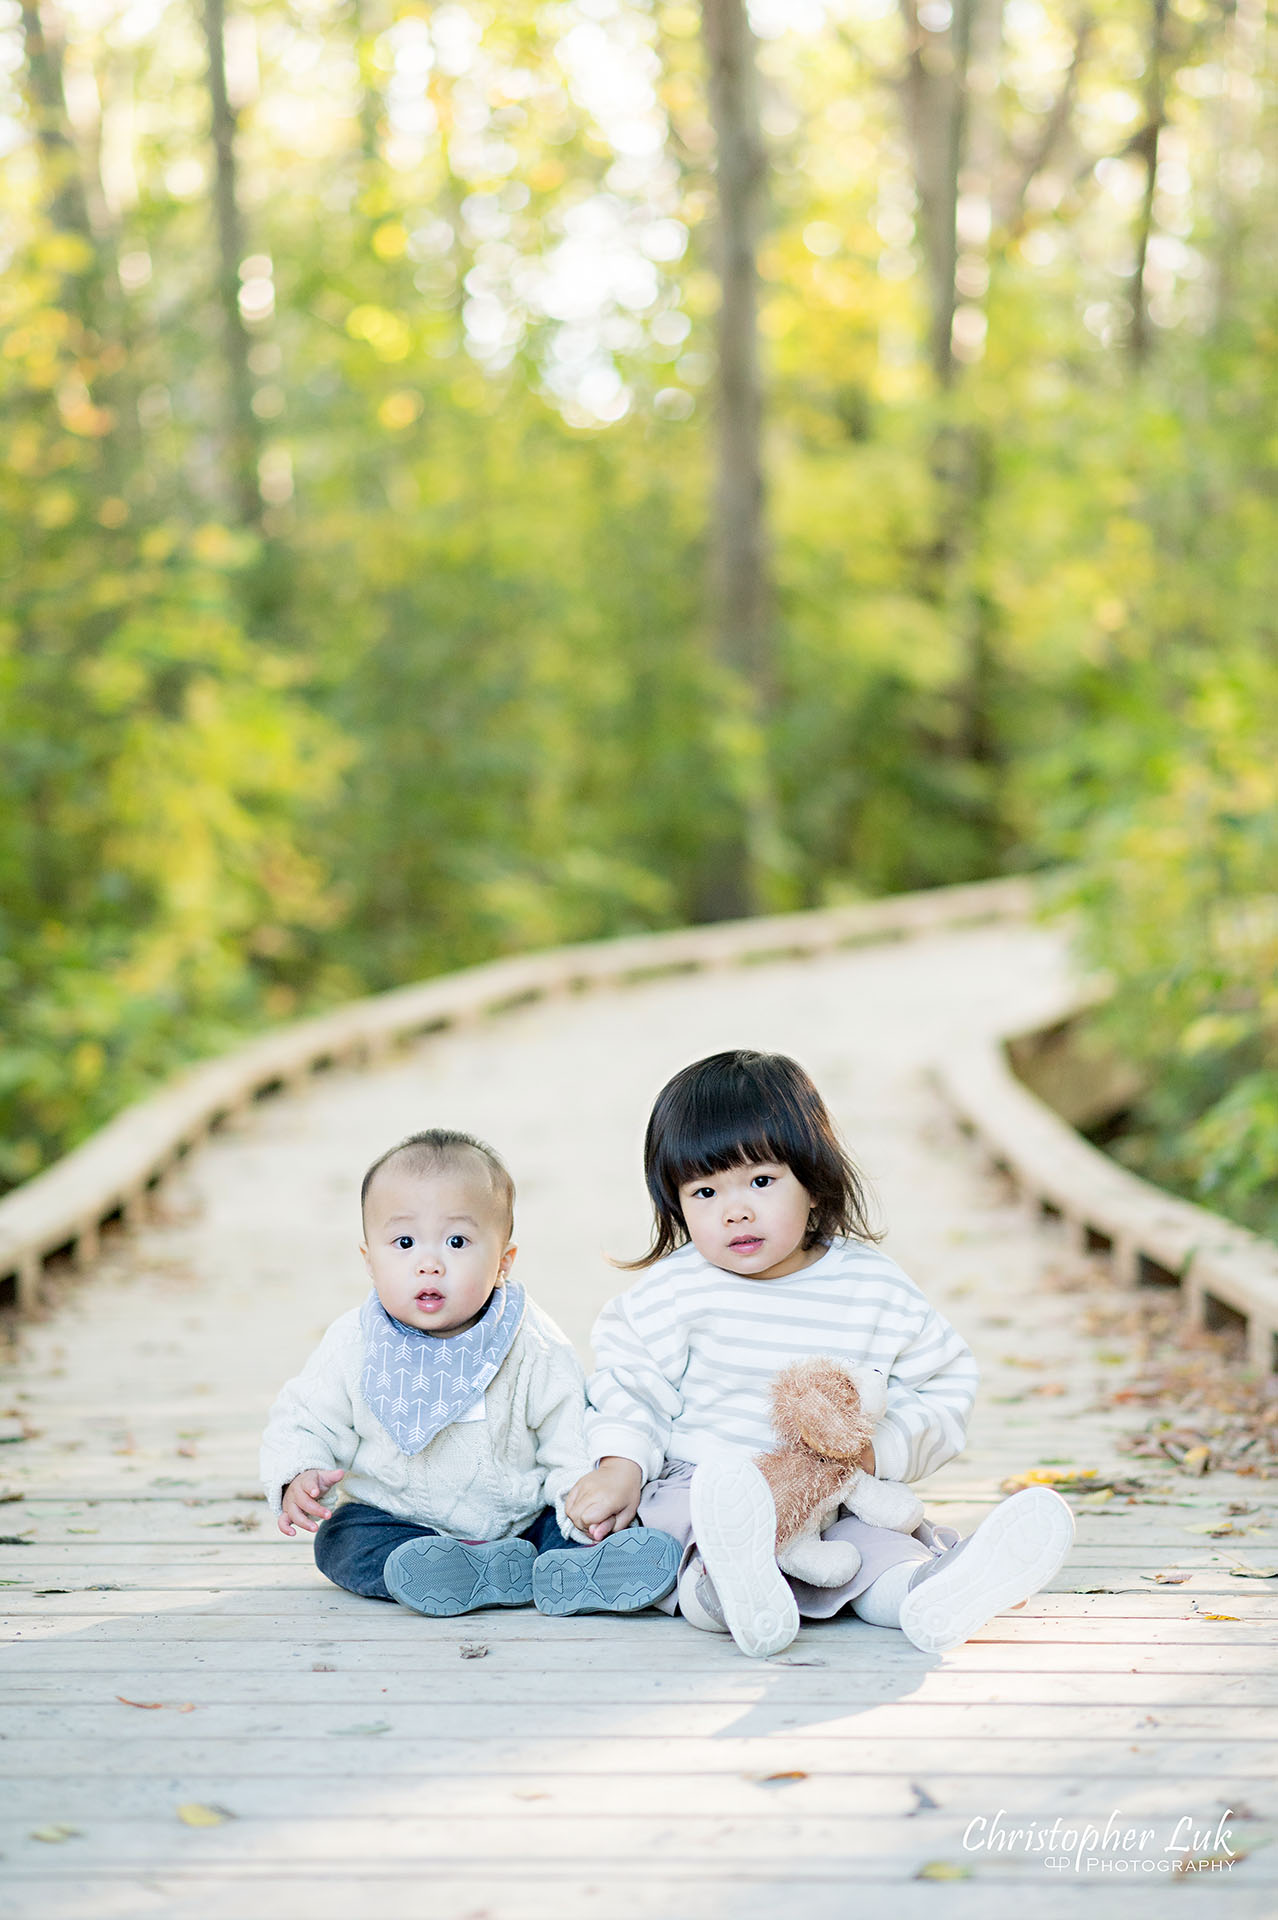 Christopher Luk Markham Family Photographer Autumn Leaves Fall Season Candid Photojournalistic Natural Bright Timeless Brother Sister Daughter Son Holding Hands Portrait